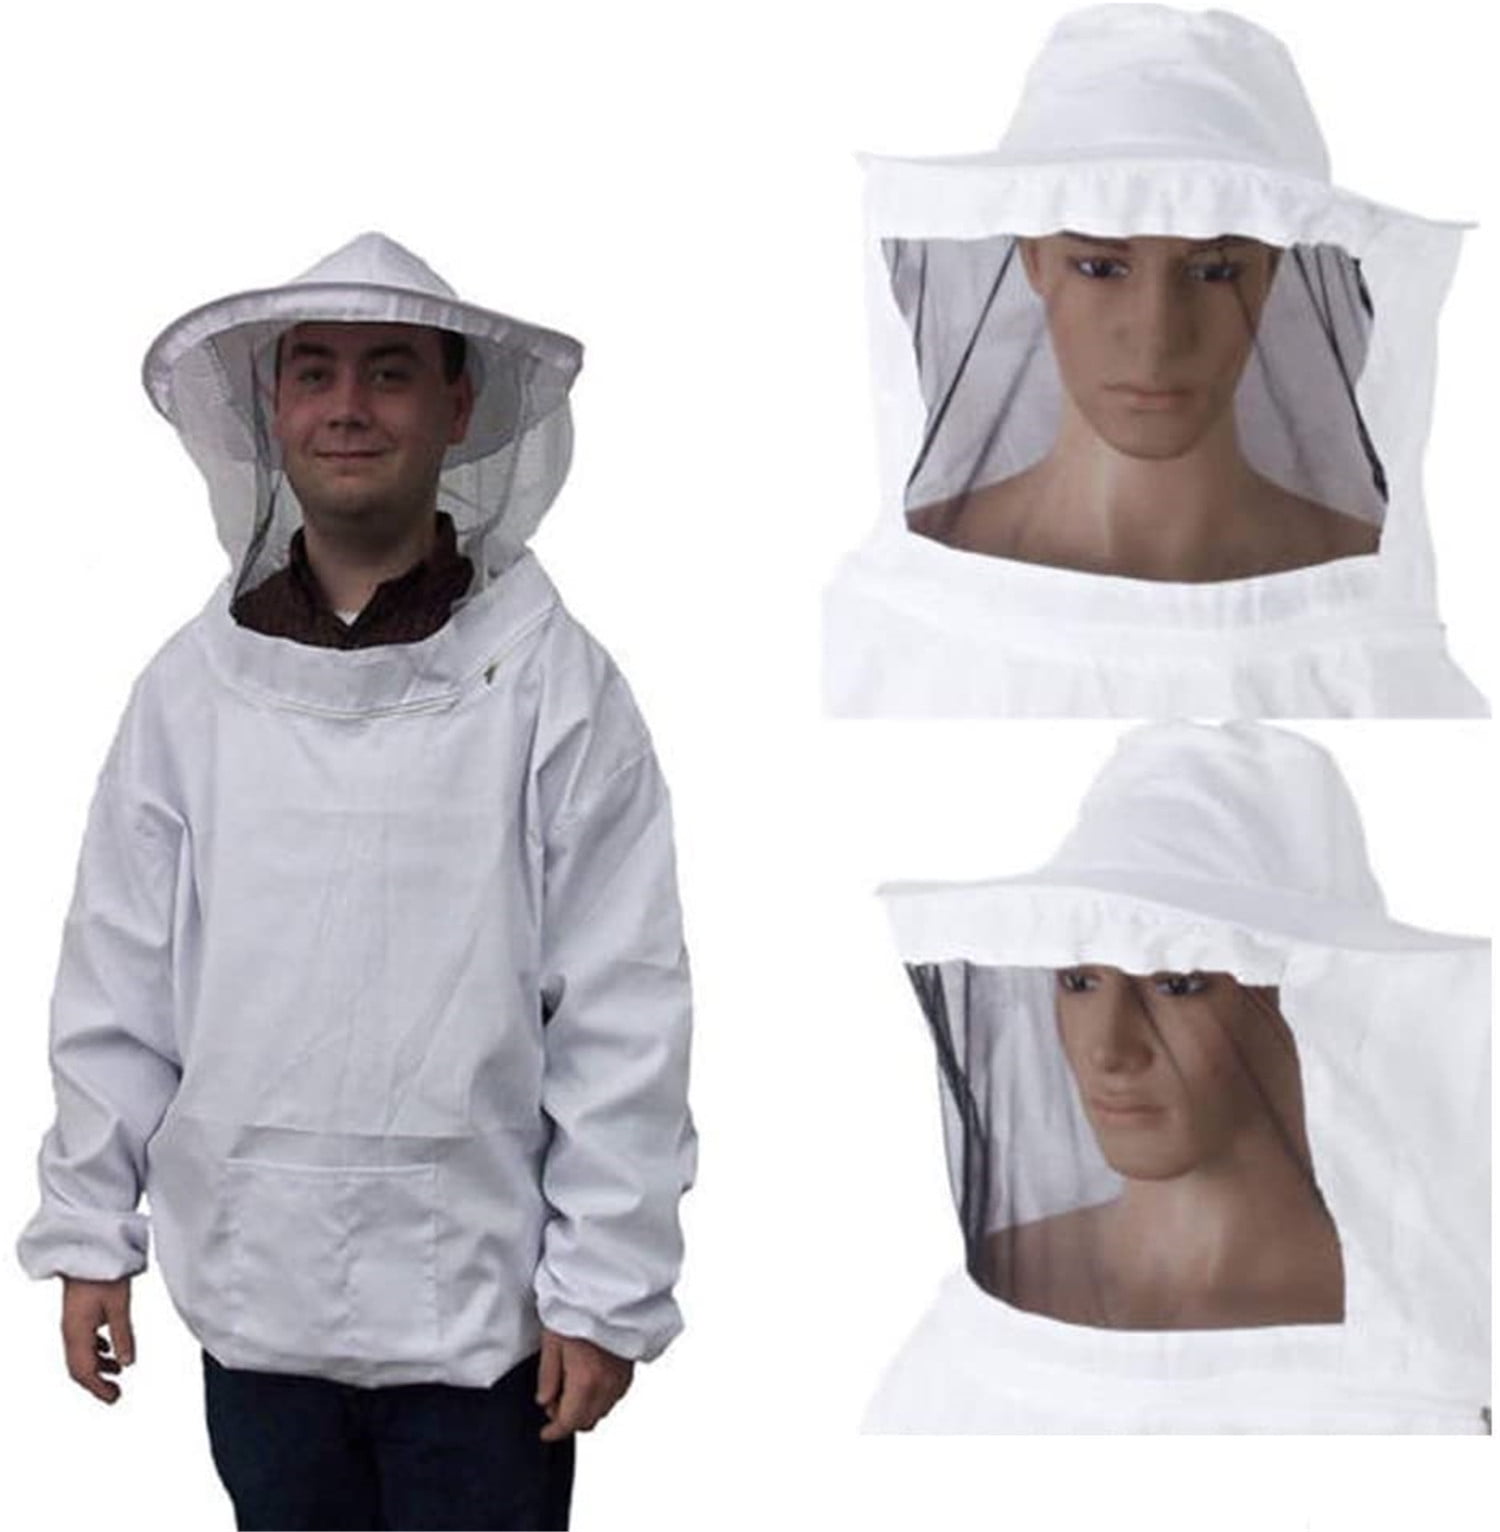 Pull Hat Smock Equipment White Bee Keeping Protective Jacket Veil Dress Suit 